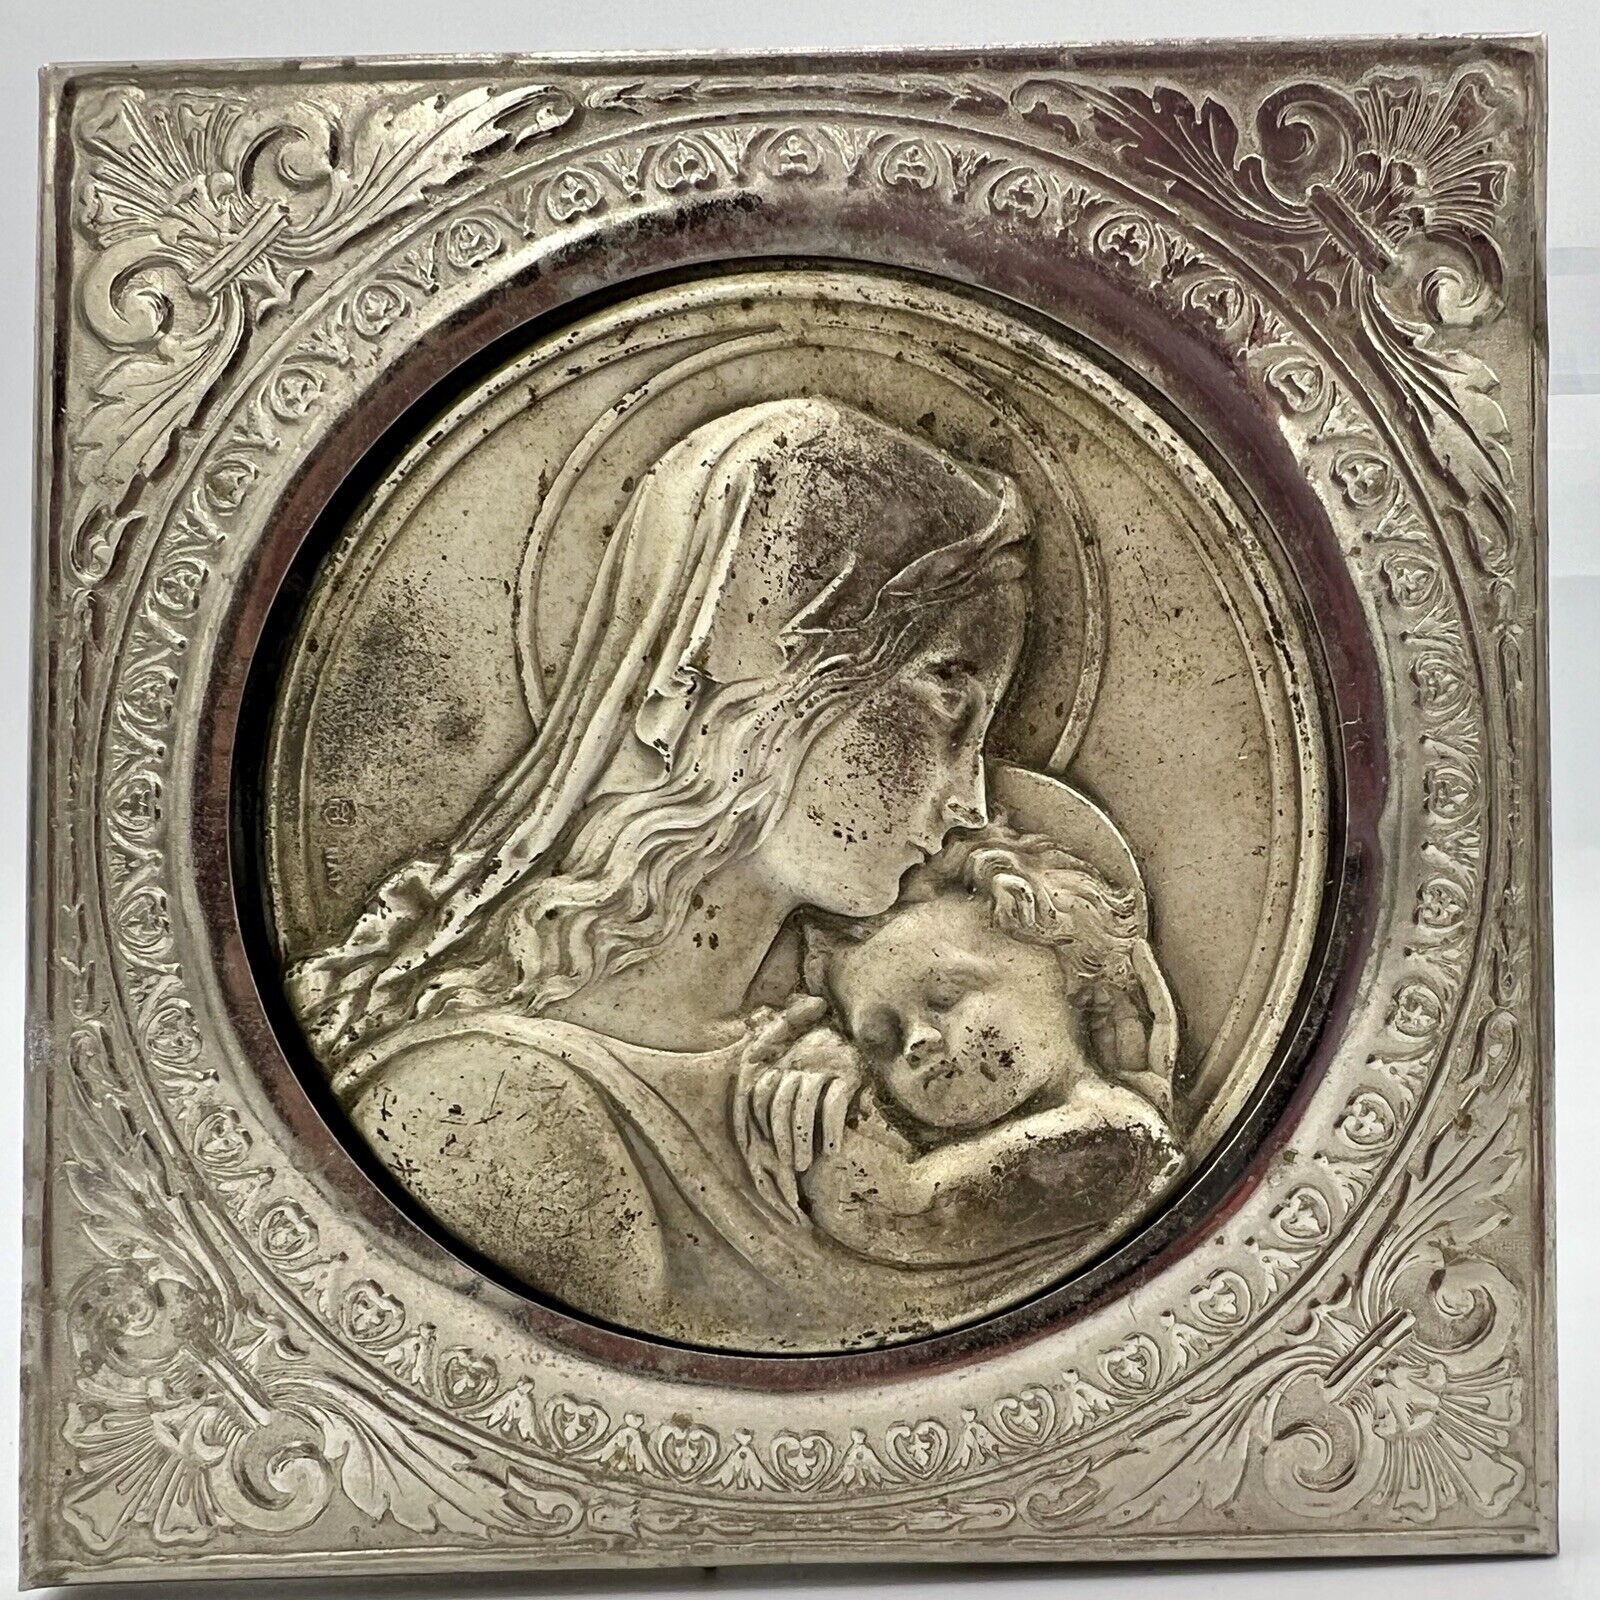 Antique Virgin Mother & Child Metal Religious Plaque Made Italy Frame 3.5 x 3.5